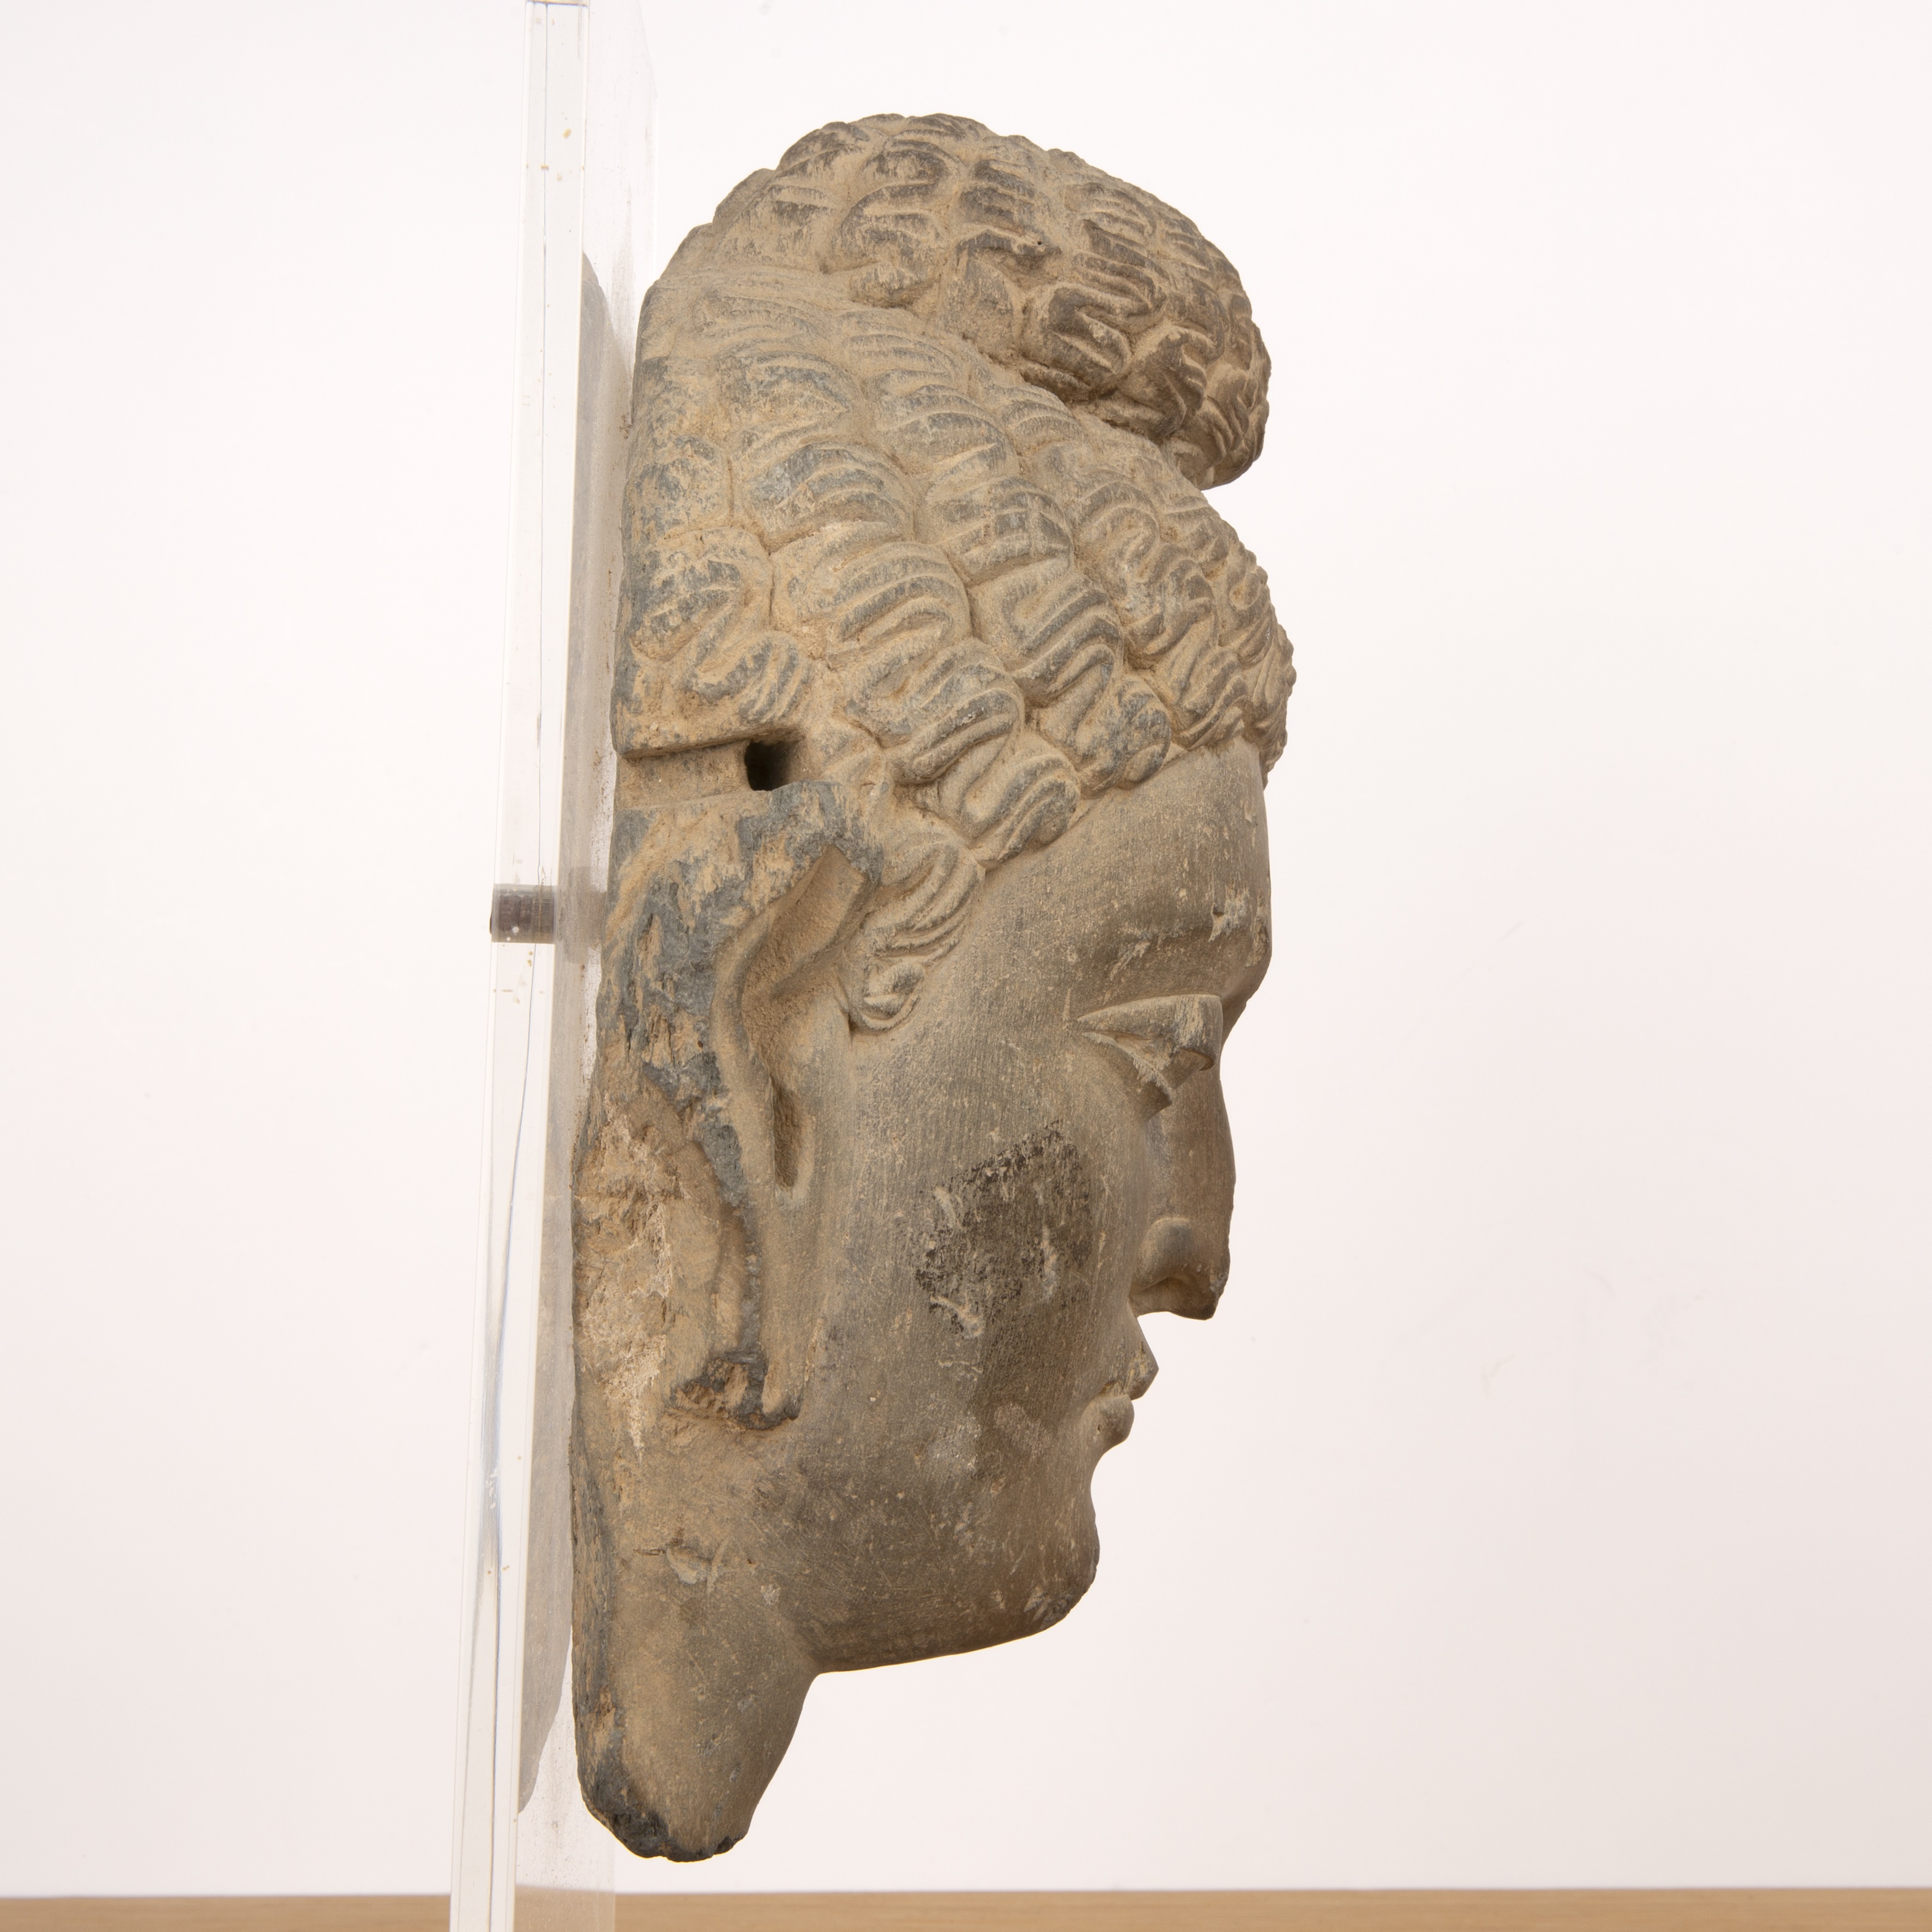 Fragmentary grey carved schist head of Buddha Indian, ancient region of Gandhara, 3rd-4th Century - Image 3 of 9